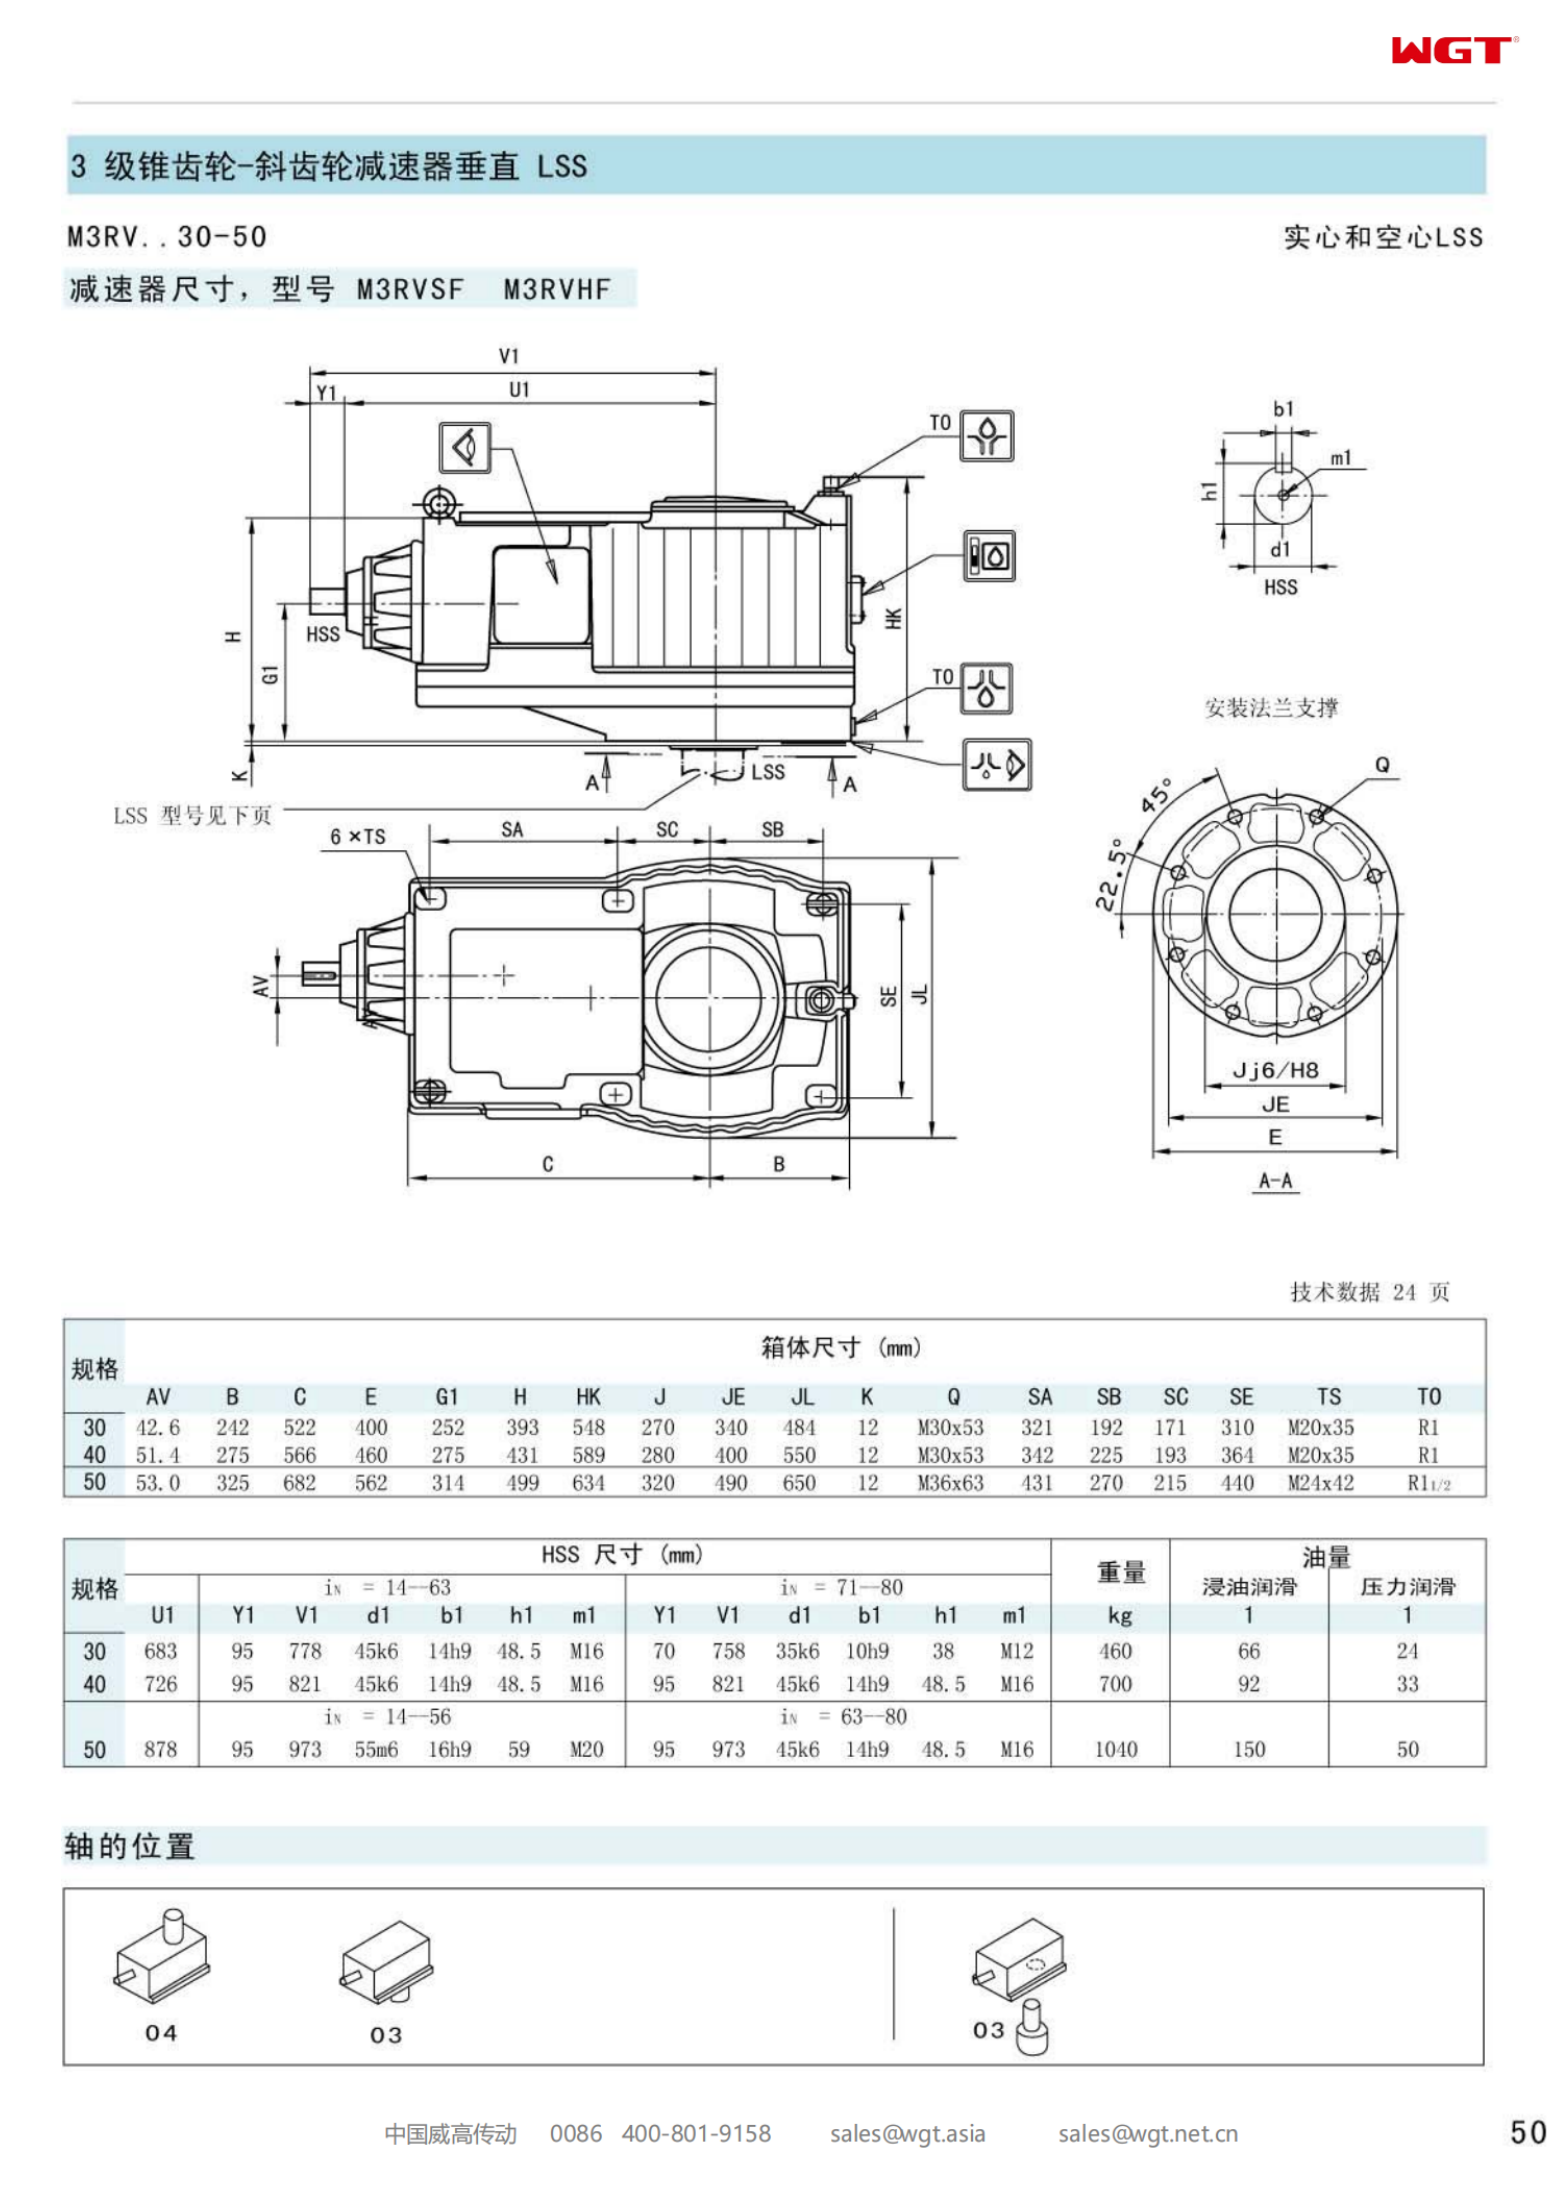 M4PVHF90 Replace_SEW_M_Series Gearbox